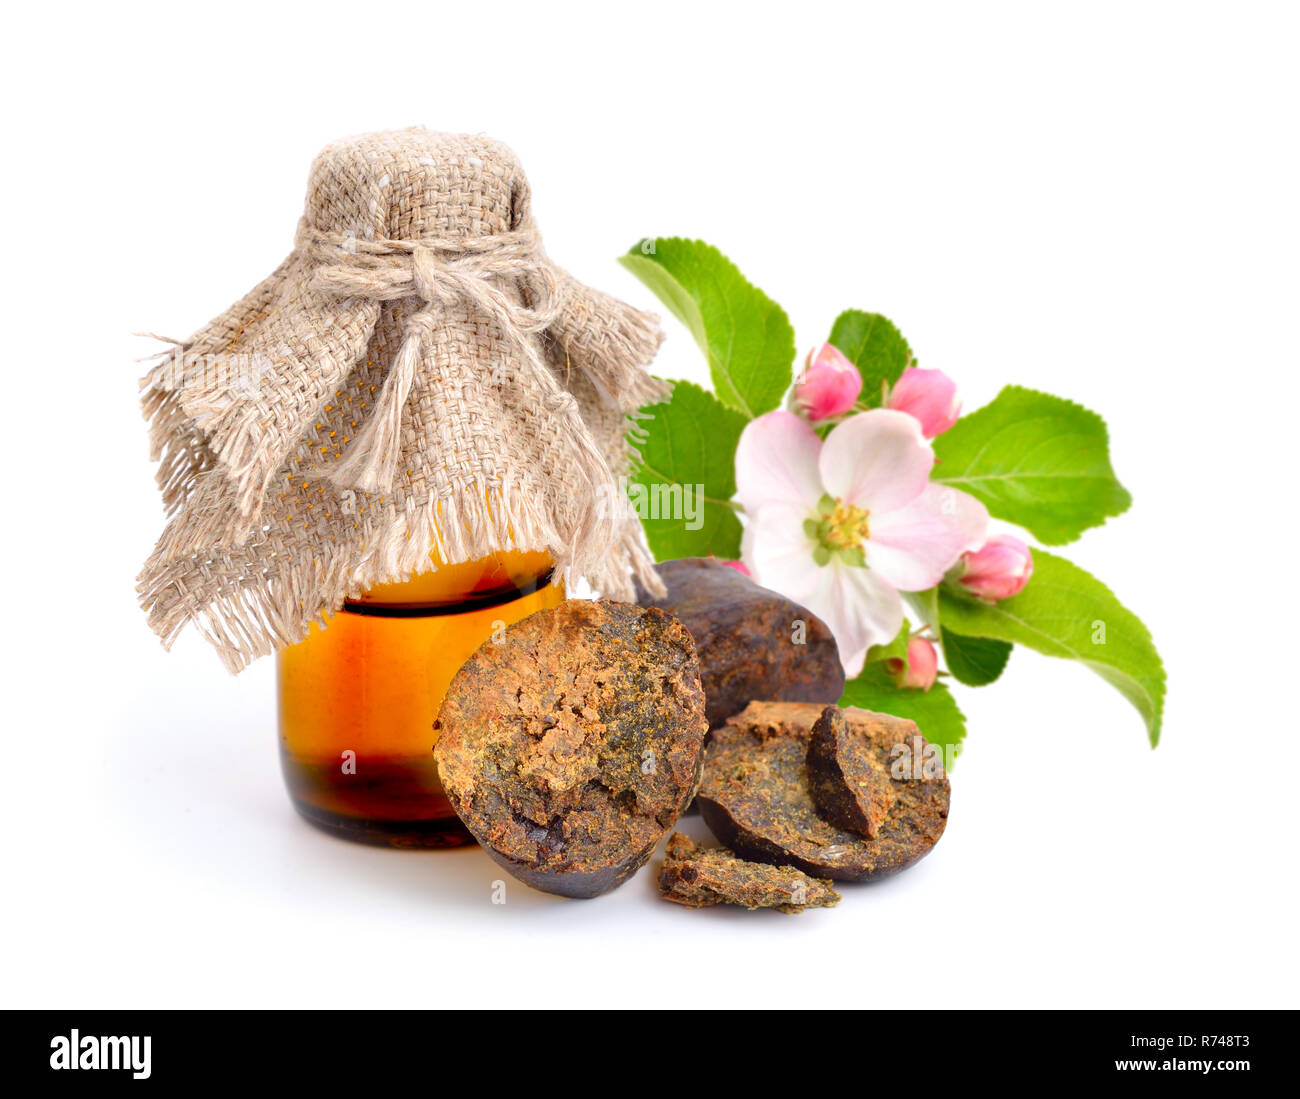 Propolis or bee glue with tincture. Isolated on white background. Stock Photo